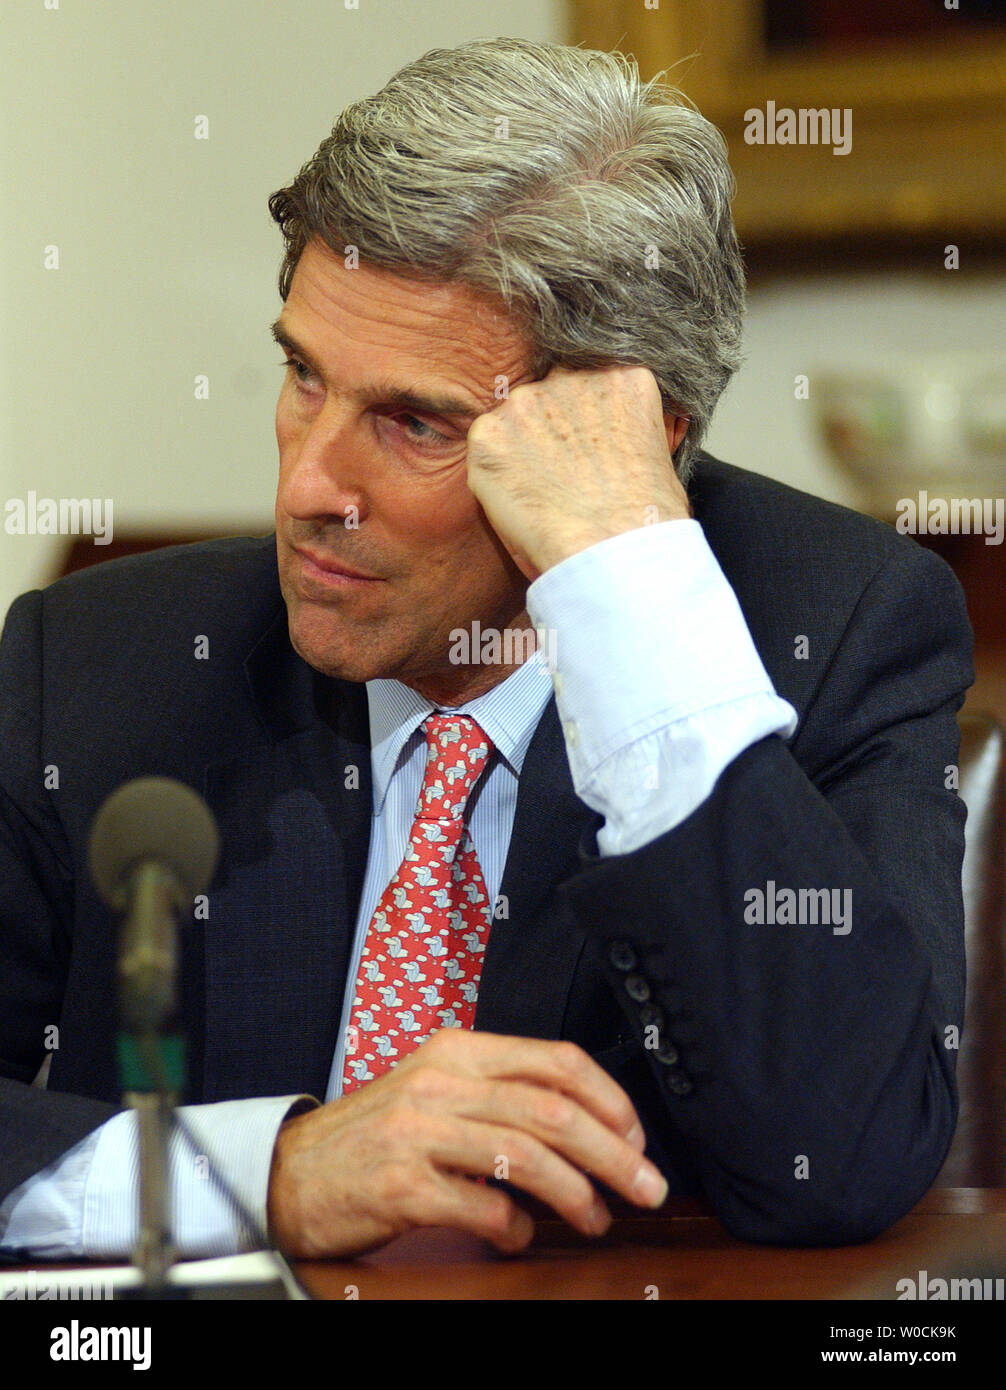 Sen. John Kerry, D-Mass., participates in the Senate Foreign Relations Committee meeting which was held to vote on John Bolton to be U.S. Ambassador to the United Nations on Capitol Hill in Washington on April 19, 2005. The committee voted to delay the vote after Sens. Chuck Hagel, R-Neb. and Sen. George Voinovich, R-Ohio, expressed concern allegations against him.   (UPI Photo/Roger L. Wollenberg) Stock Photo